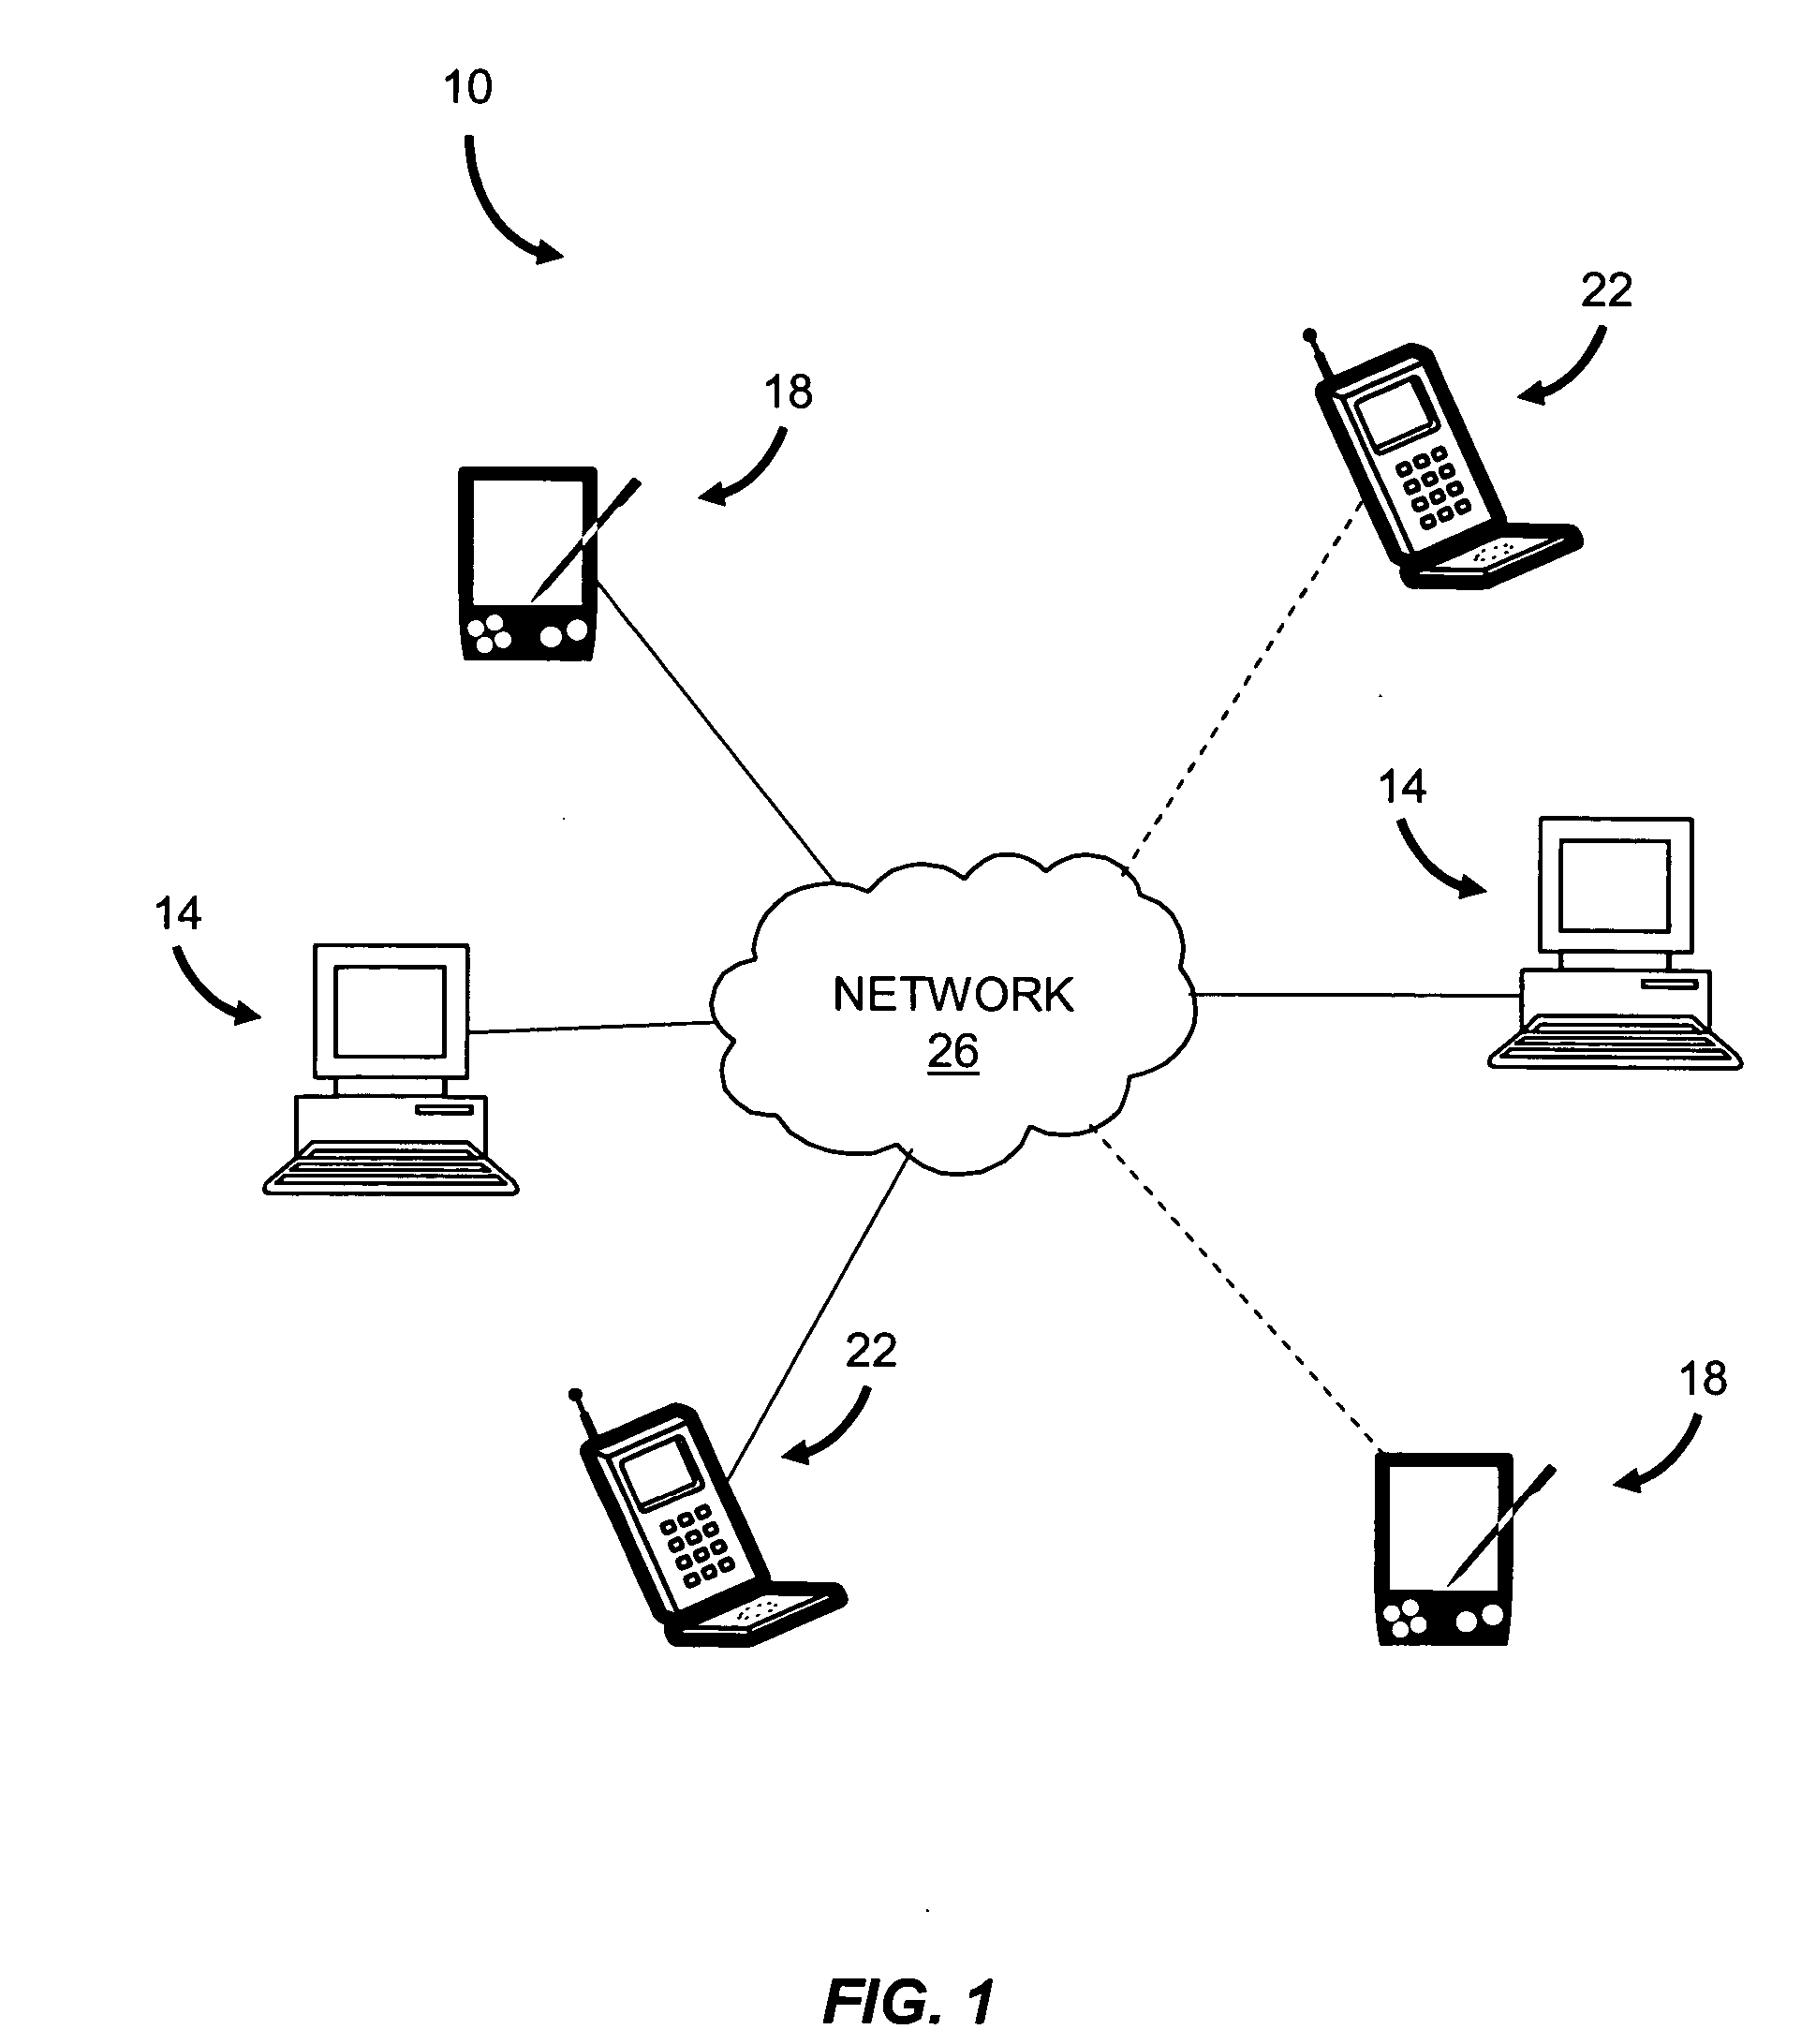 Graphical representation of the availability of an instant messaging user for communication